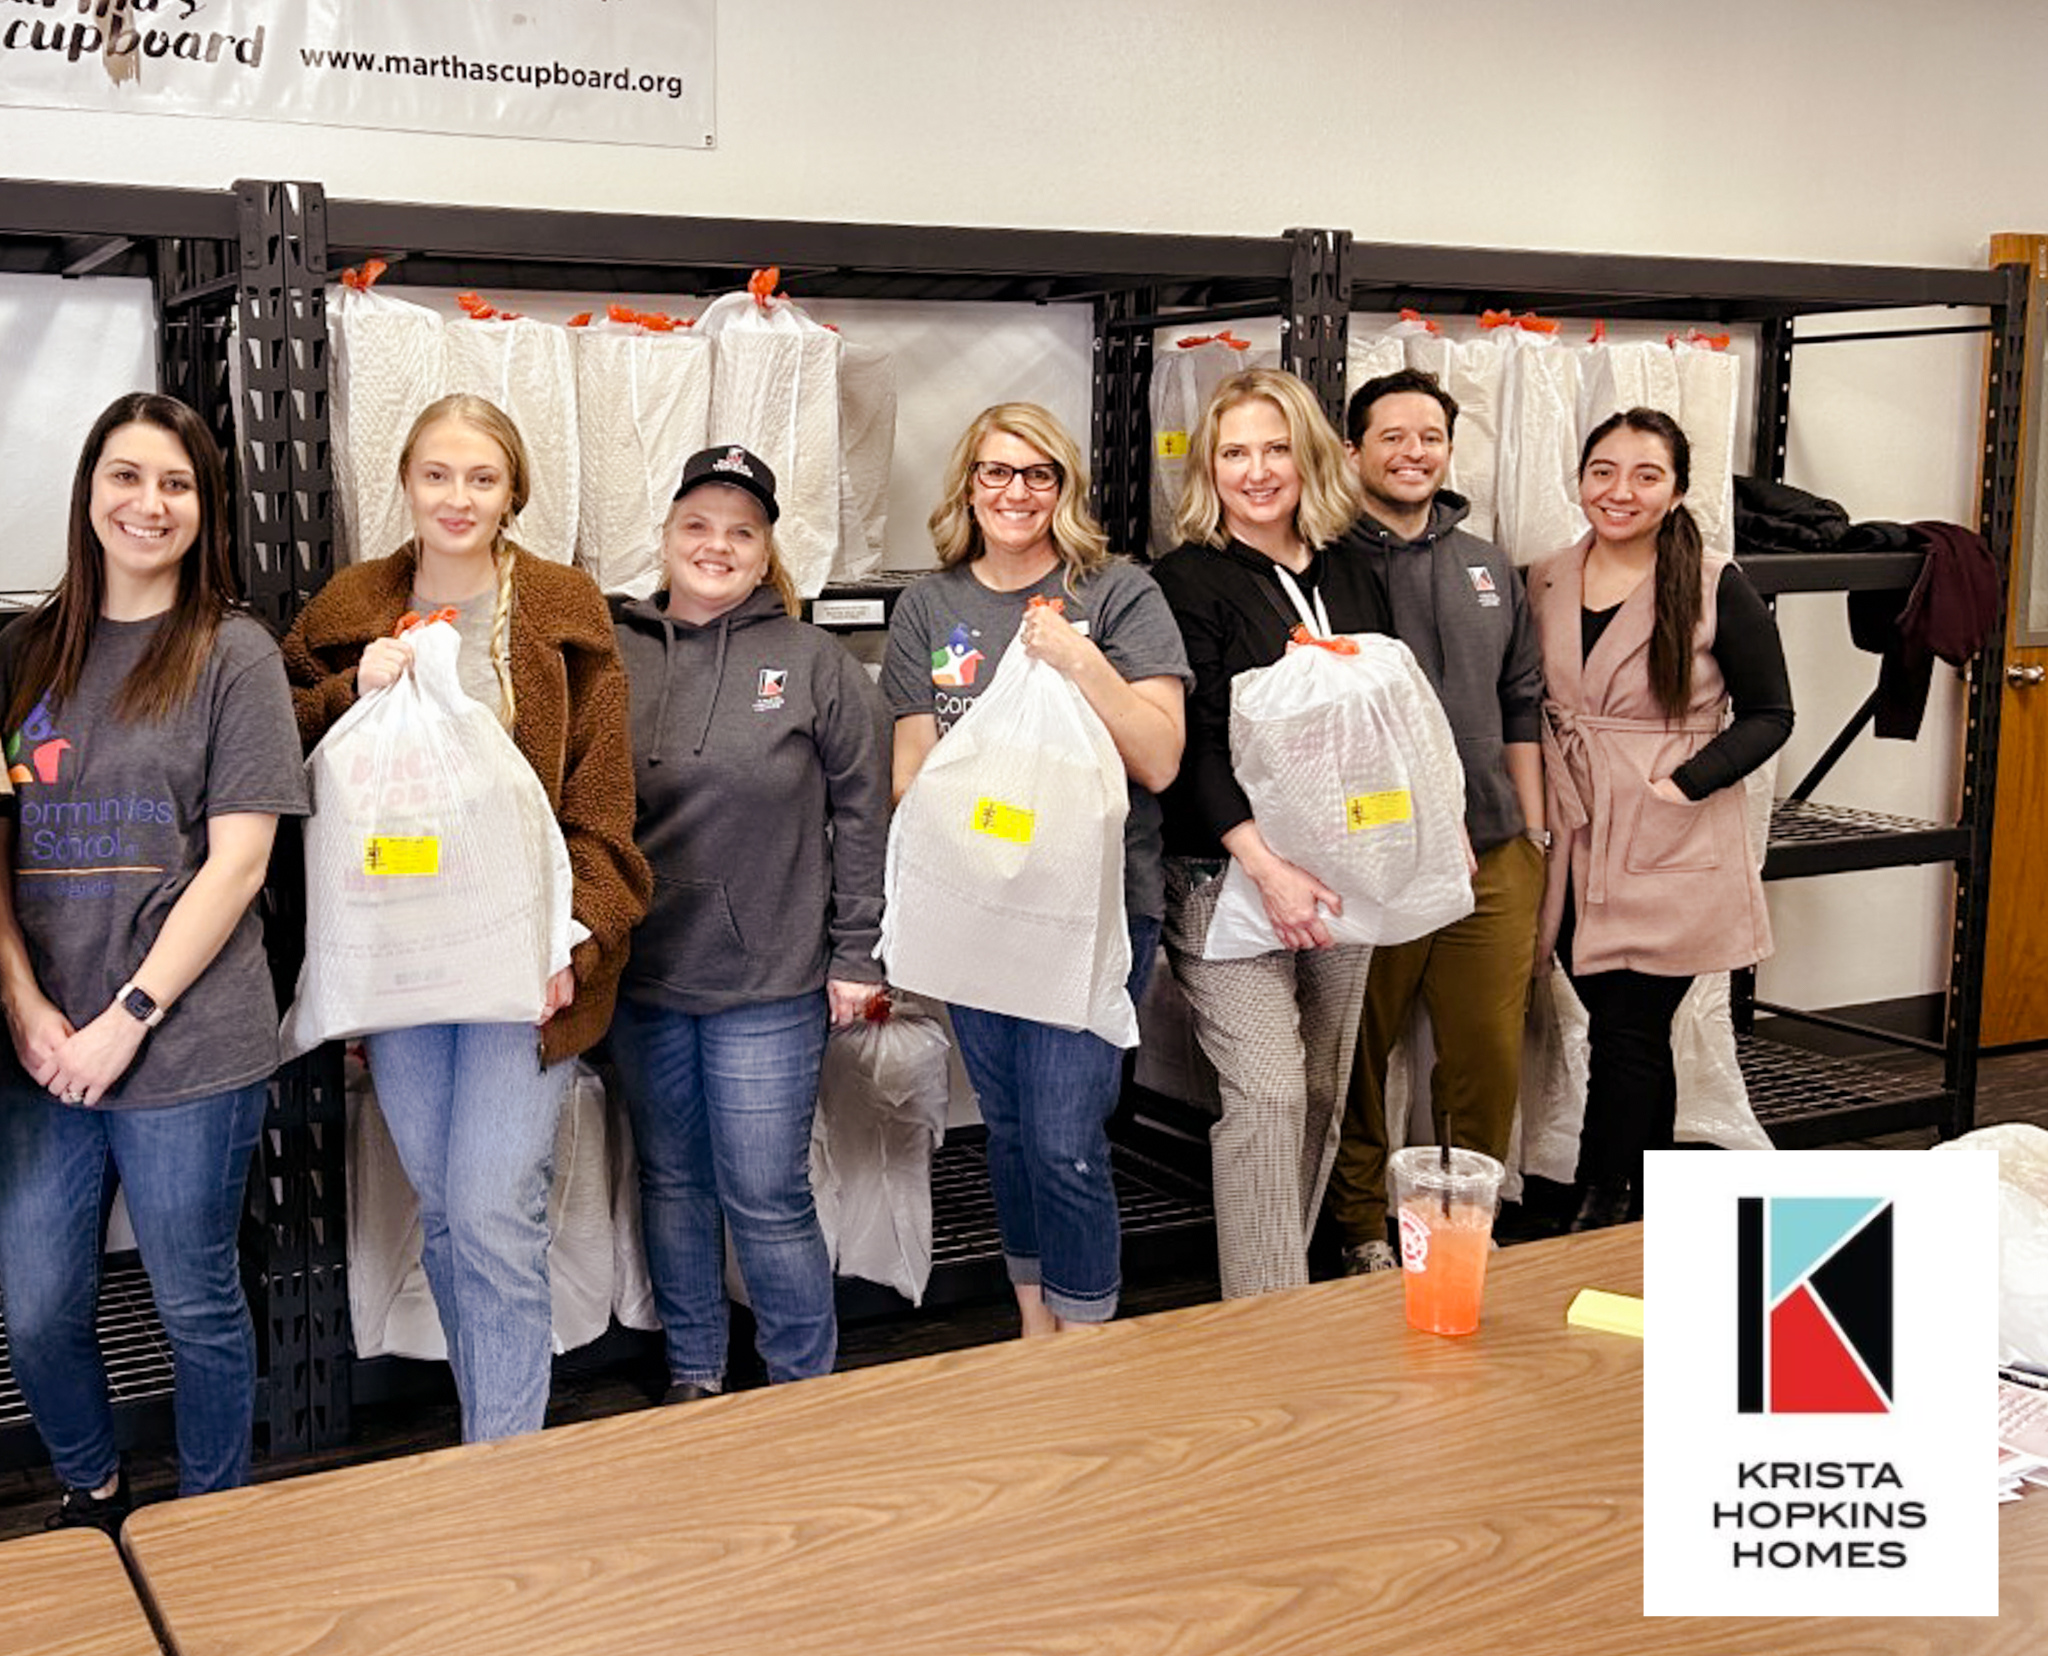 Krista Hopkins Homes team standing proudly alongside Communities in Schools staff during a volunteer day, united in our commitment to empowering students and supporting the community.